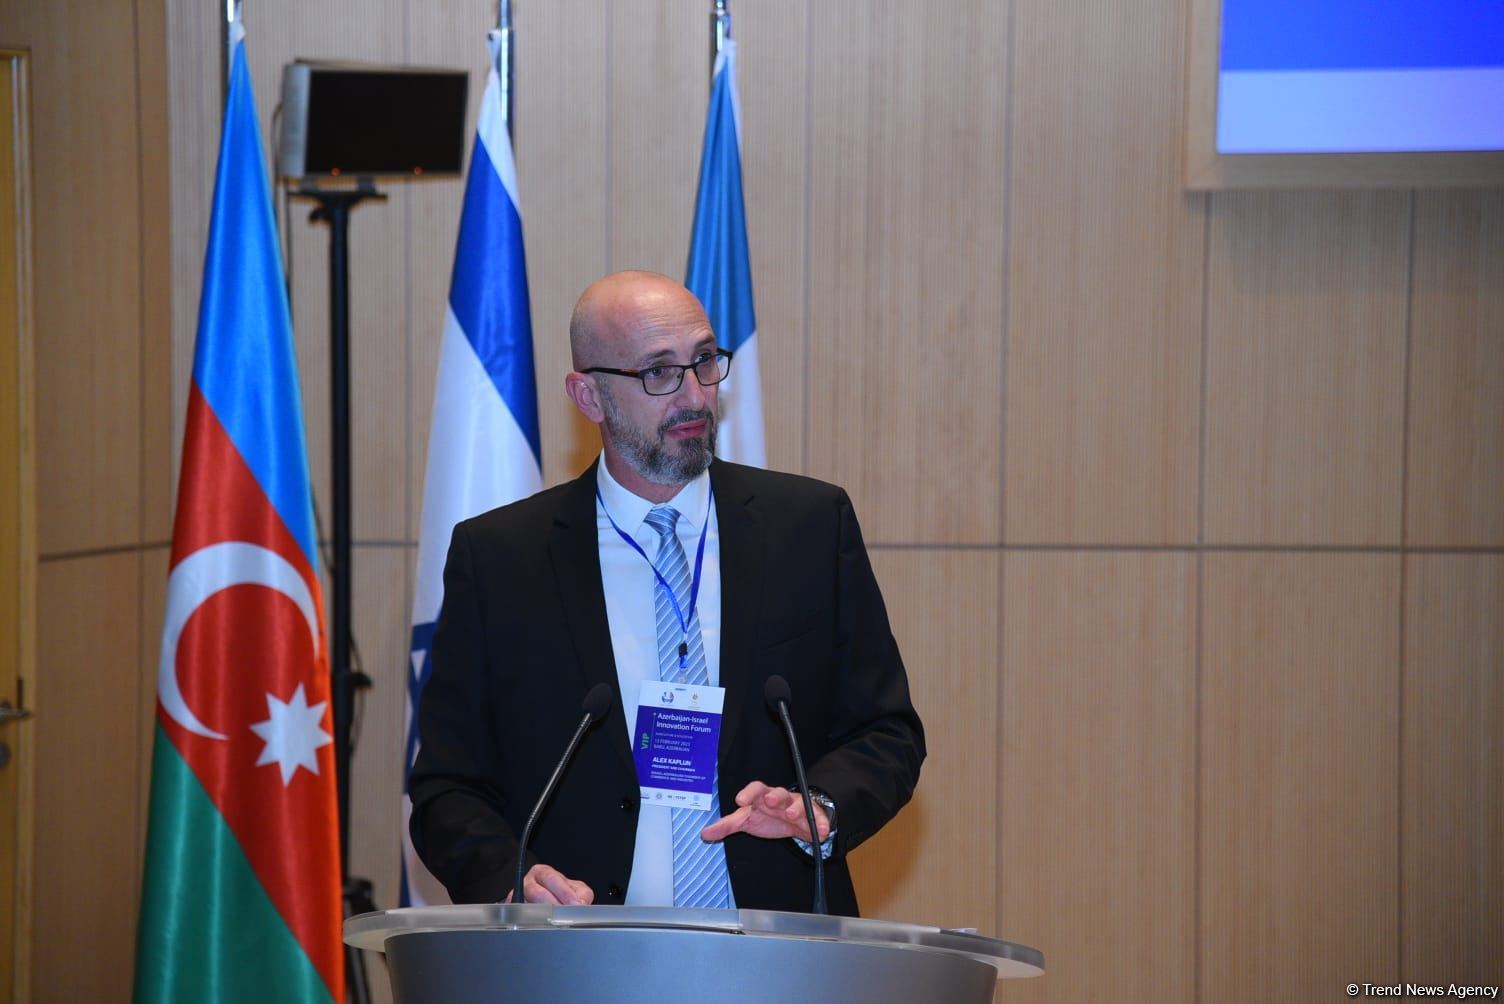 Israel develops relations with Azerbaijan in innovations field - Chamber of Commerce (PHOTO)